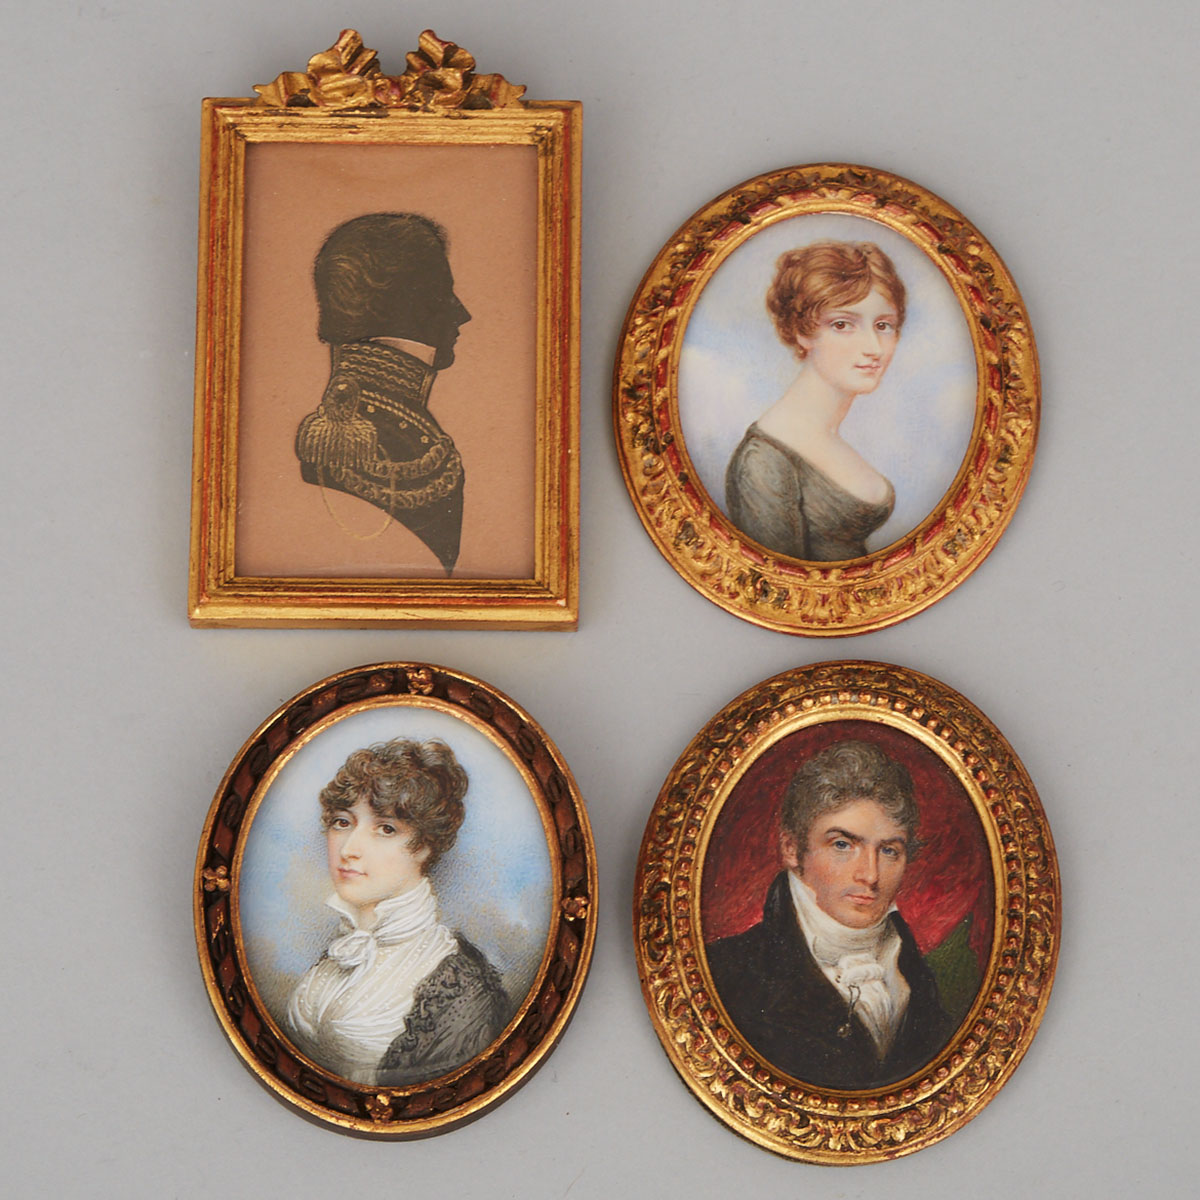 Four Brown Family Portraits Miniature, early 19th century